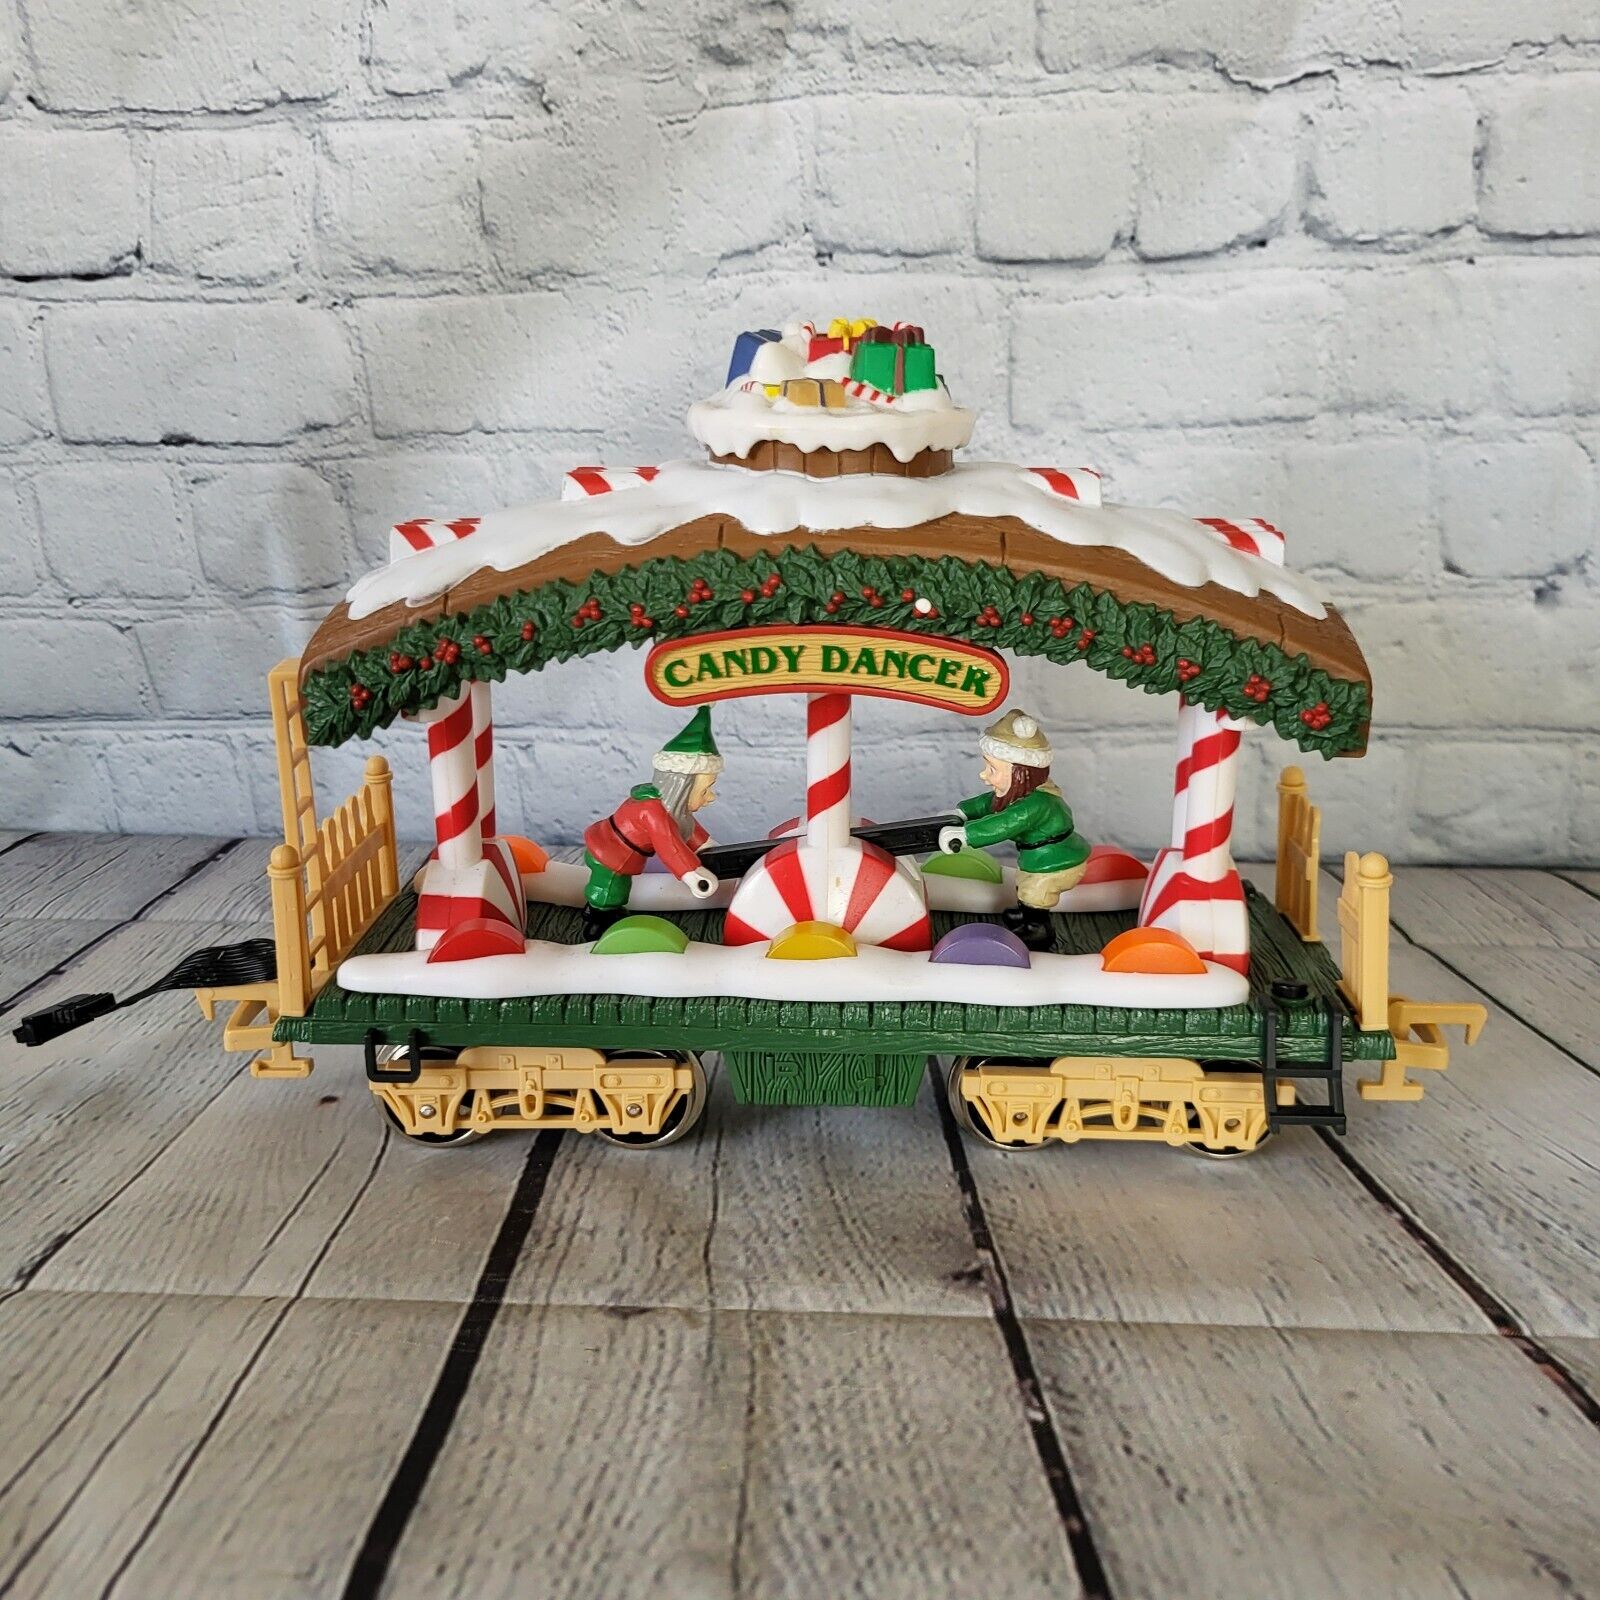 Candy Dancer New Bright Holiday Express Model 380 Animated Train Car Christmas